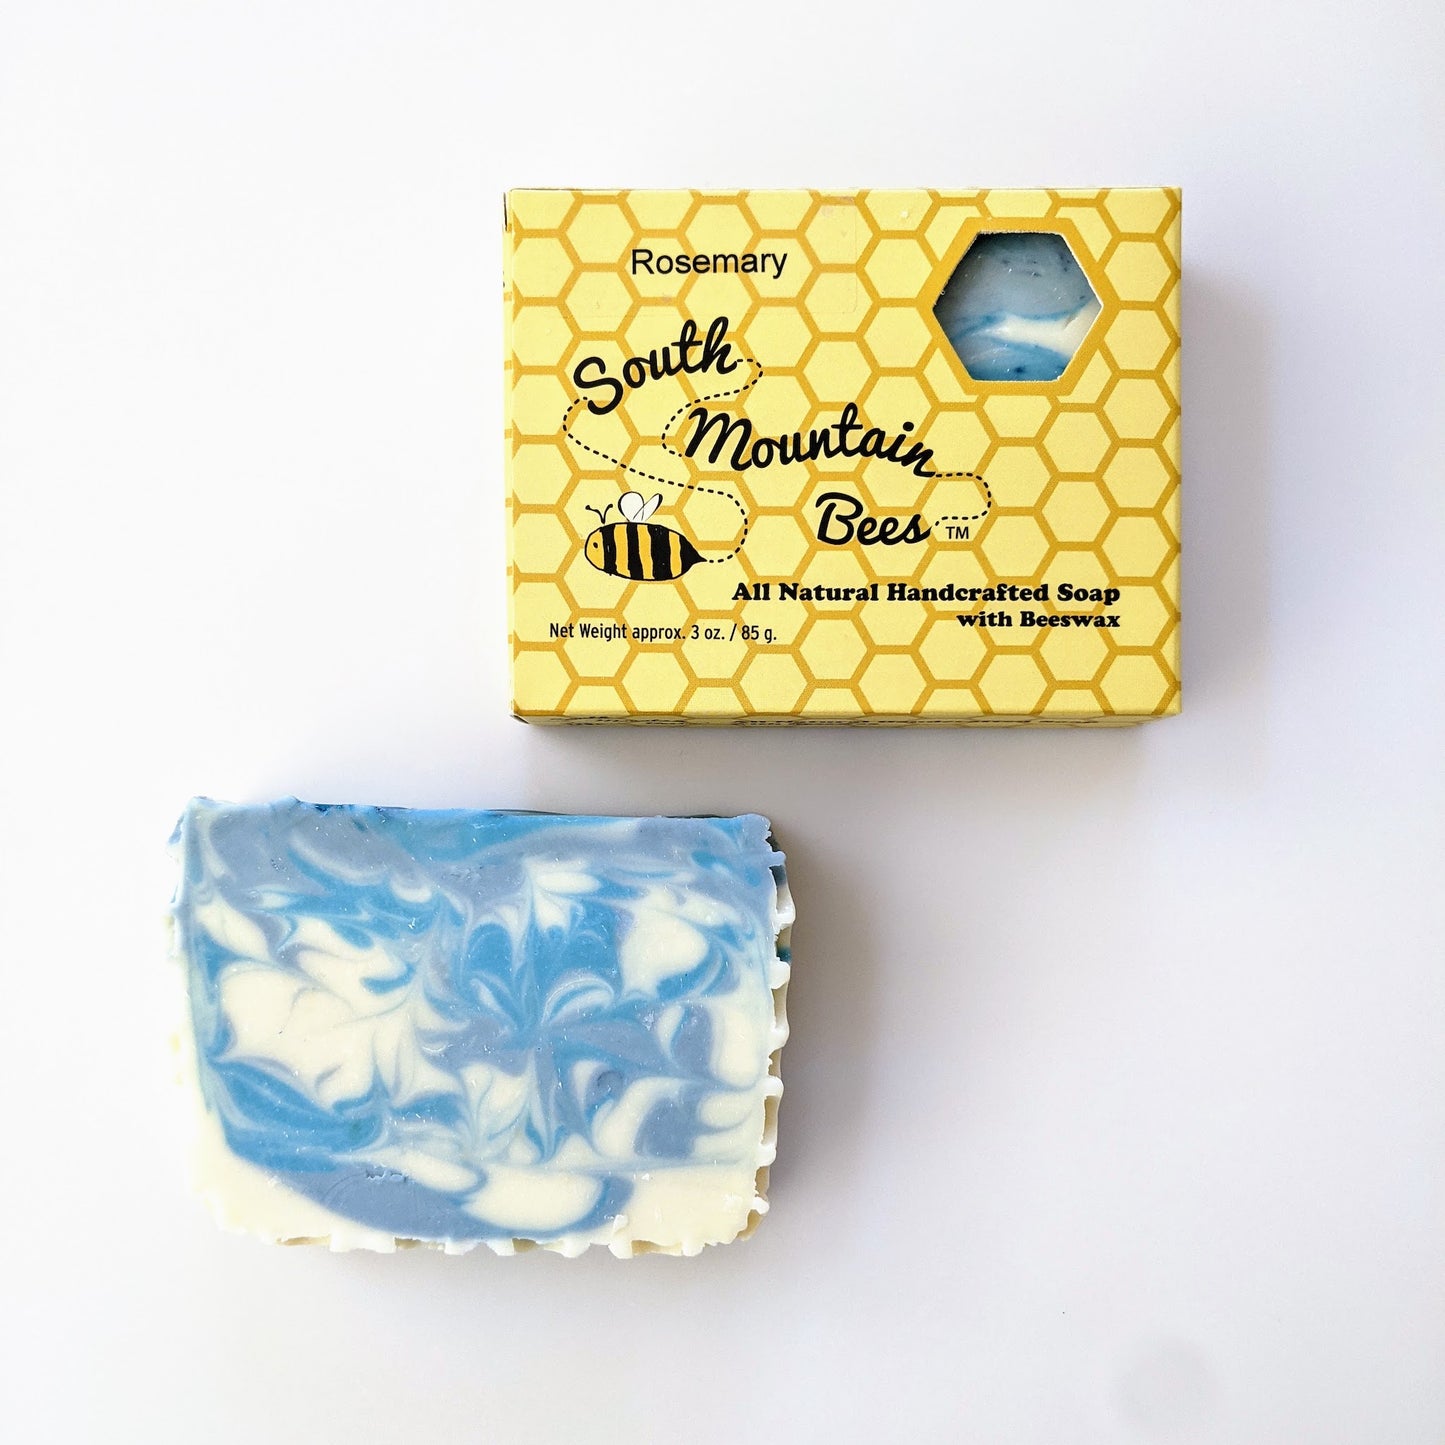 Rosemary Dream is a honey soap with blue and grey swirls. It sits next to a soap box where you can see the soap through a hexagonal window.